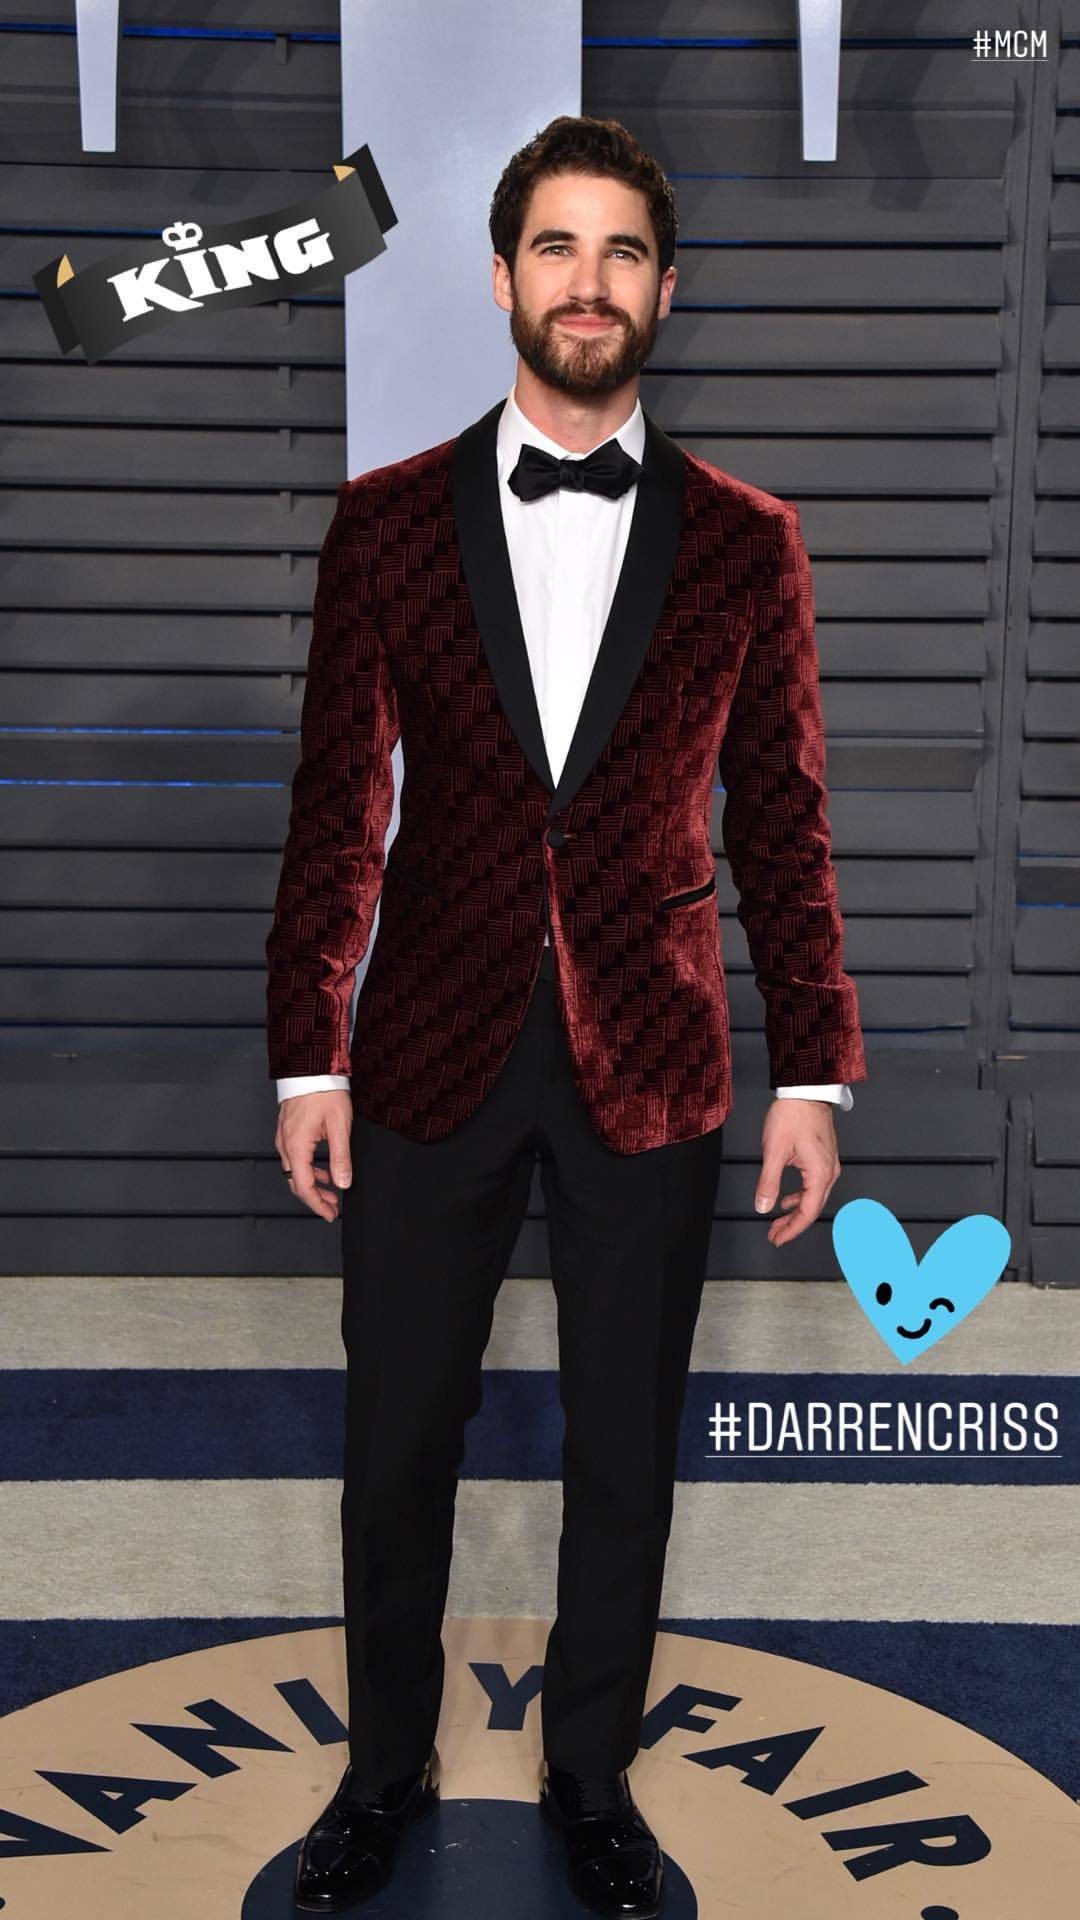 happinessistrending - Darren's Miscellaneous Projects and Events for 2018 - Page 3 Tumblr_p67xapBh3g1wpi2k2o1_1280